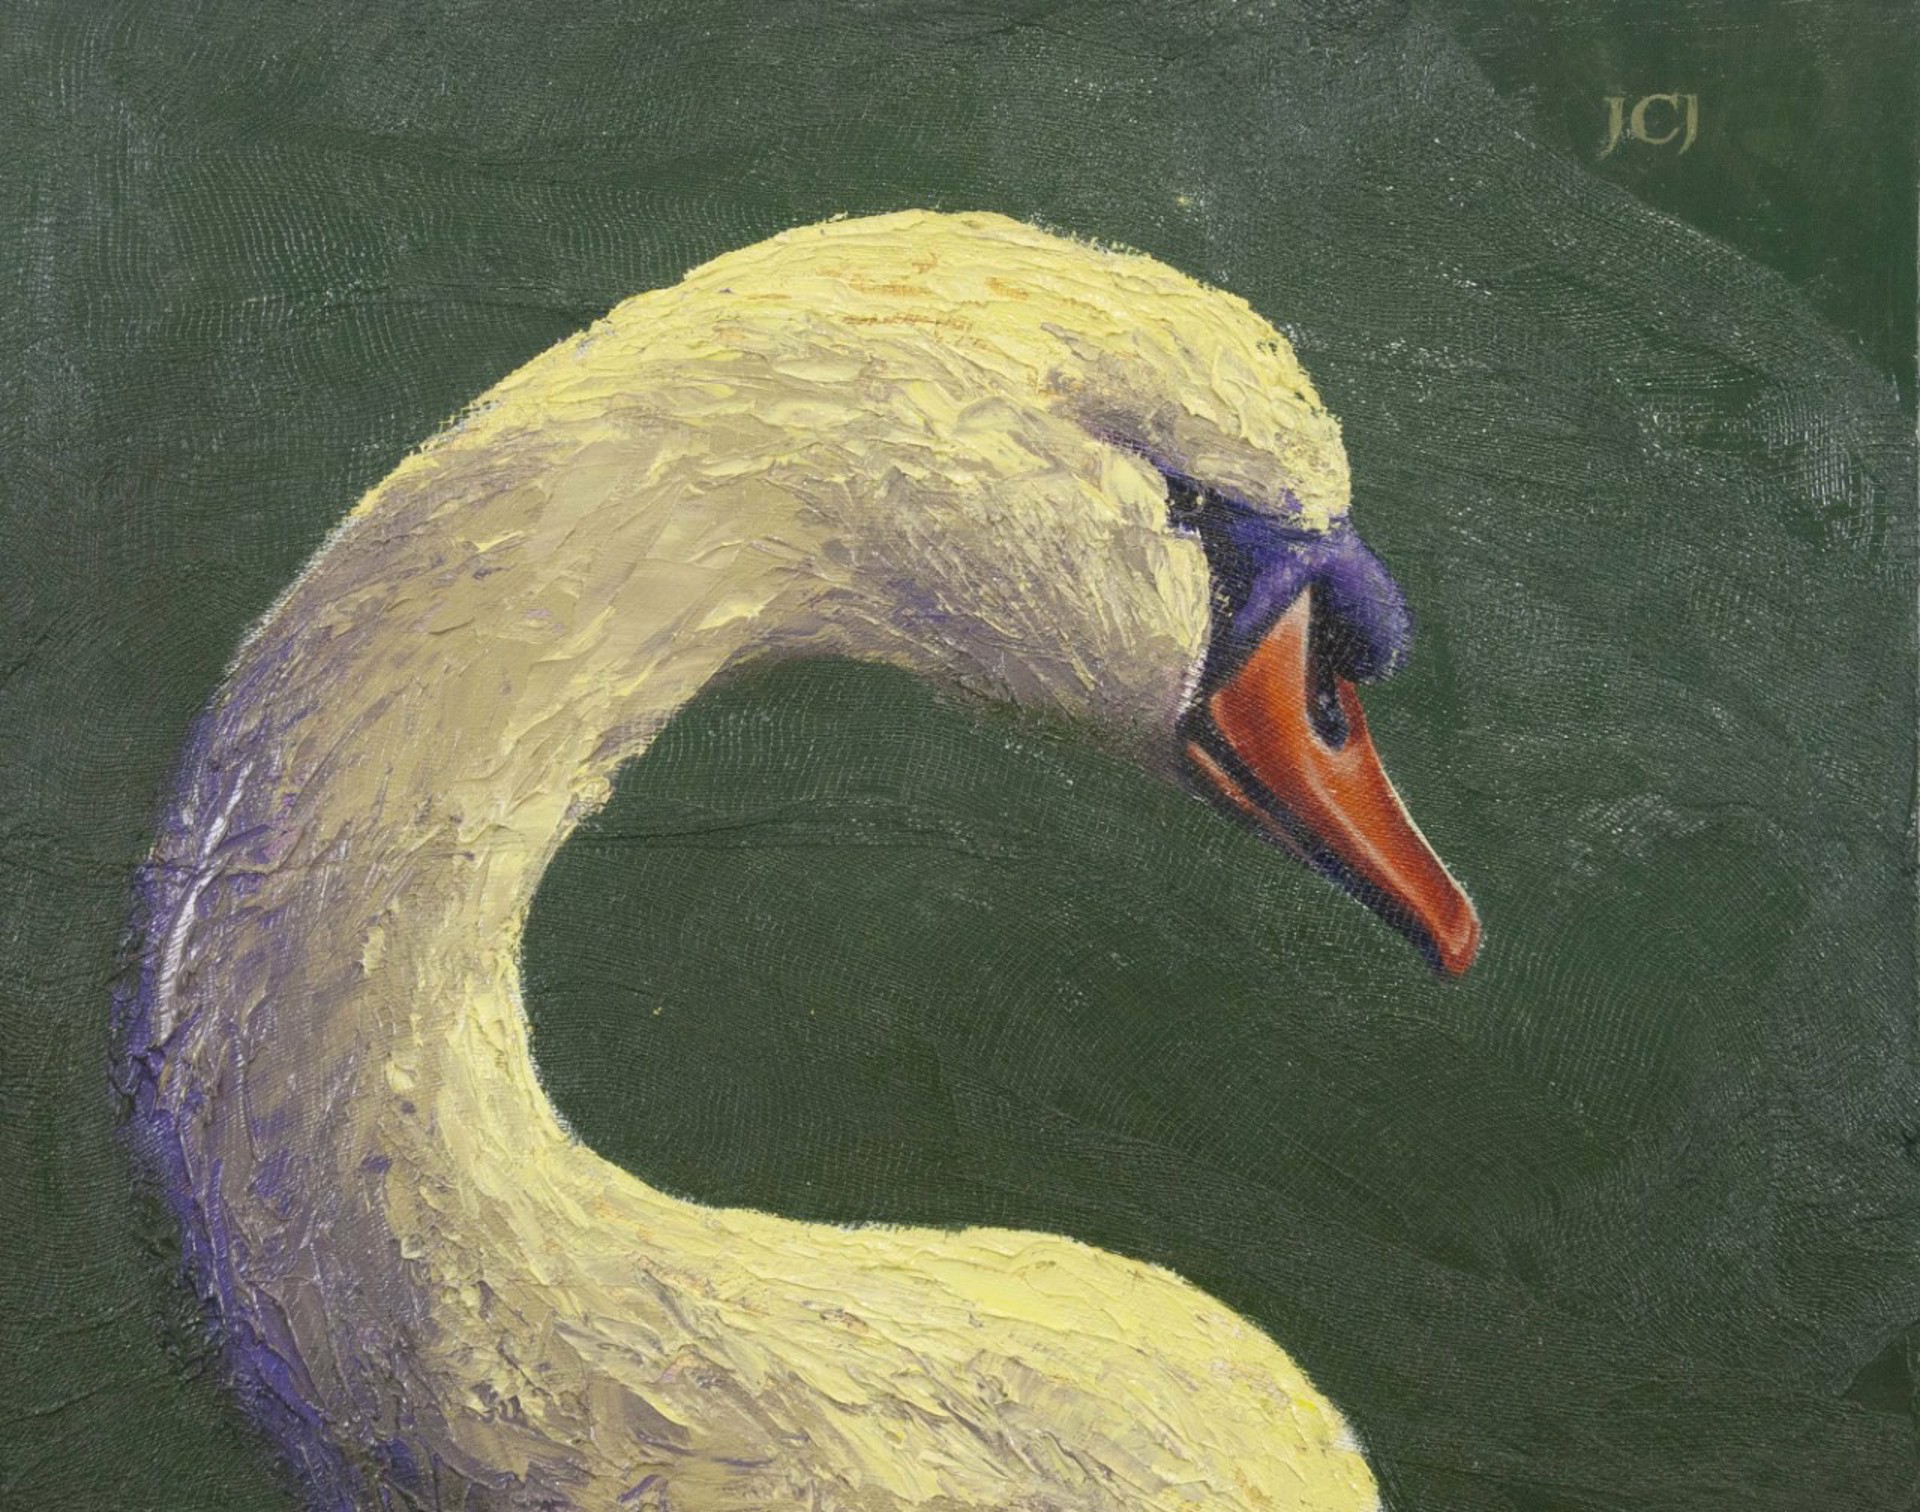 Swan by James Courtenay James